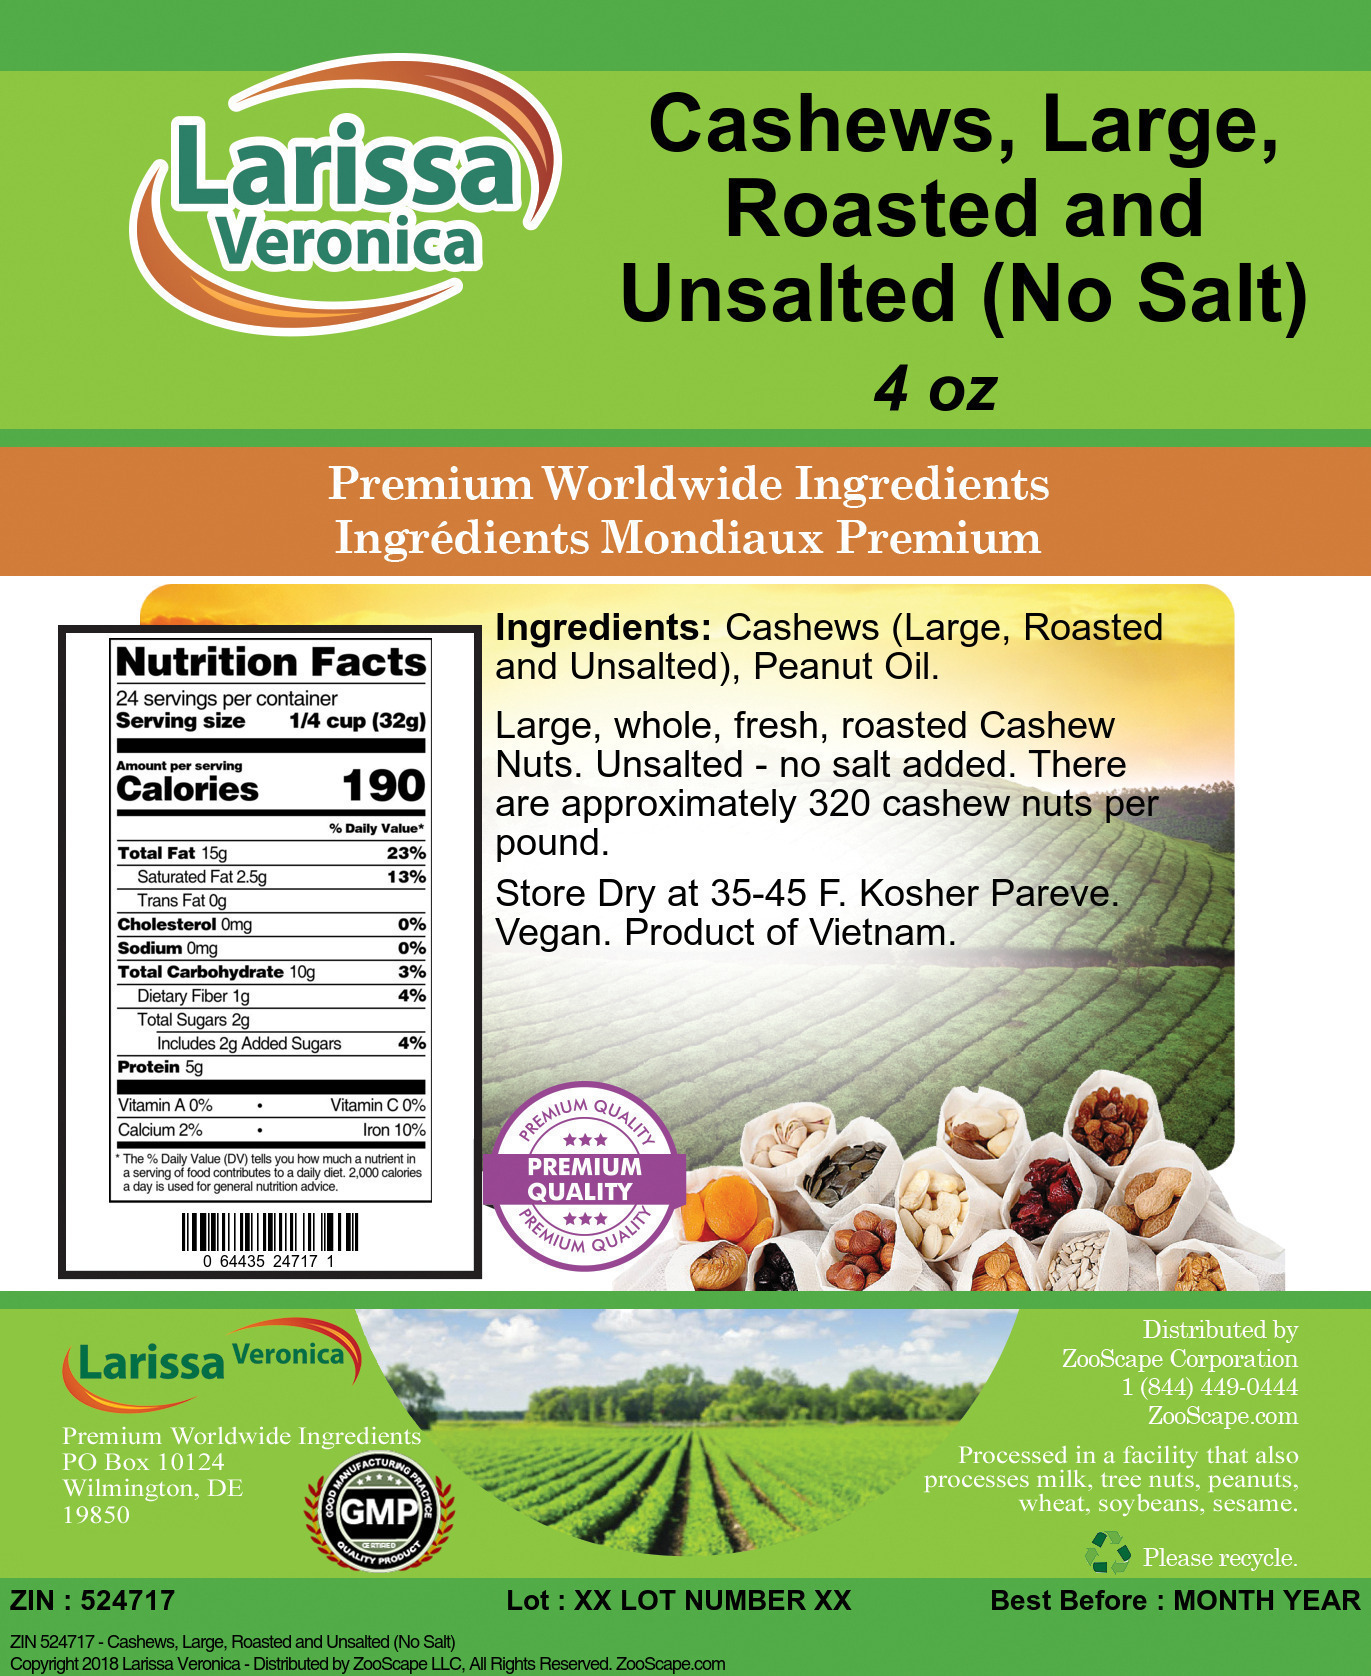 Cashews, Large, Roasted and Unsalted (No Salt) - Label